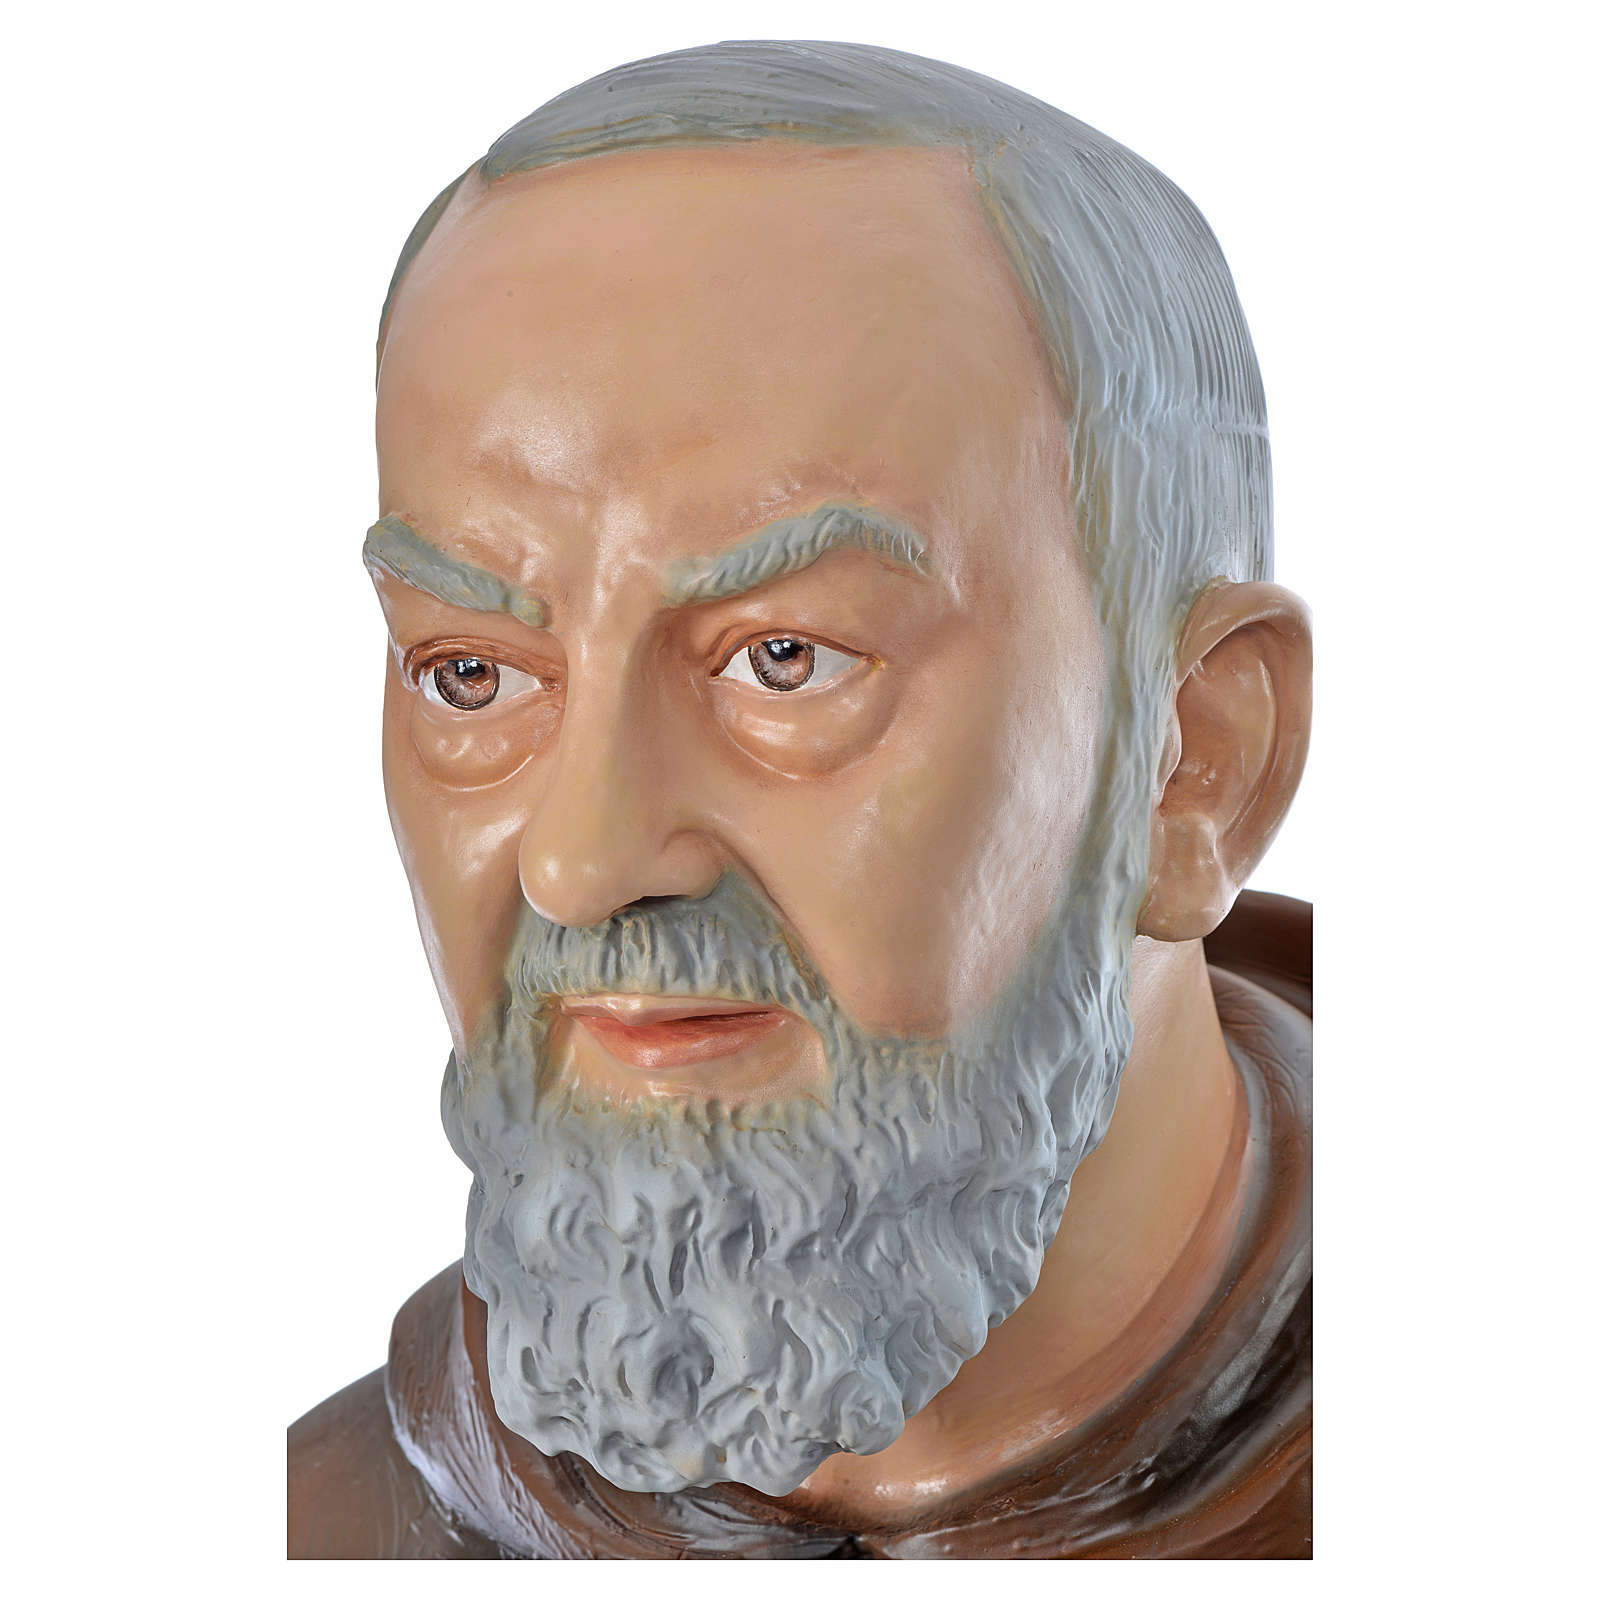 60cm in Painted reconstituted ma Holyart Padre Pio of Petralcina Statue 